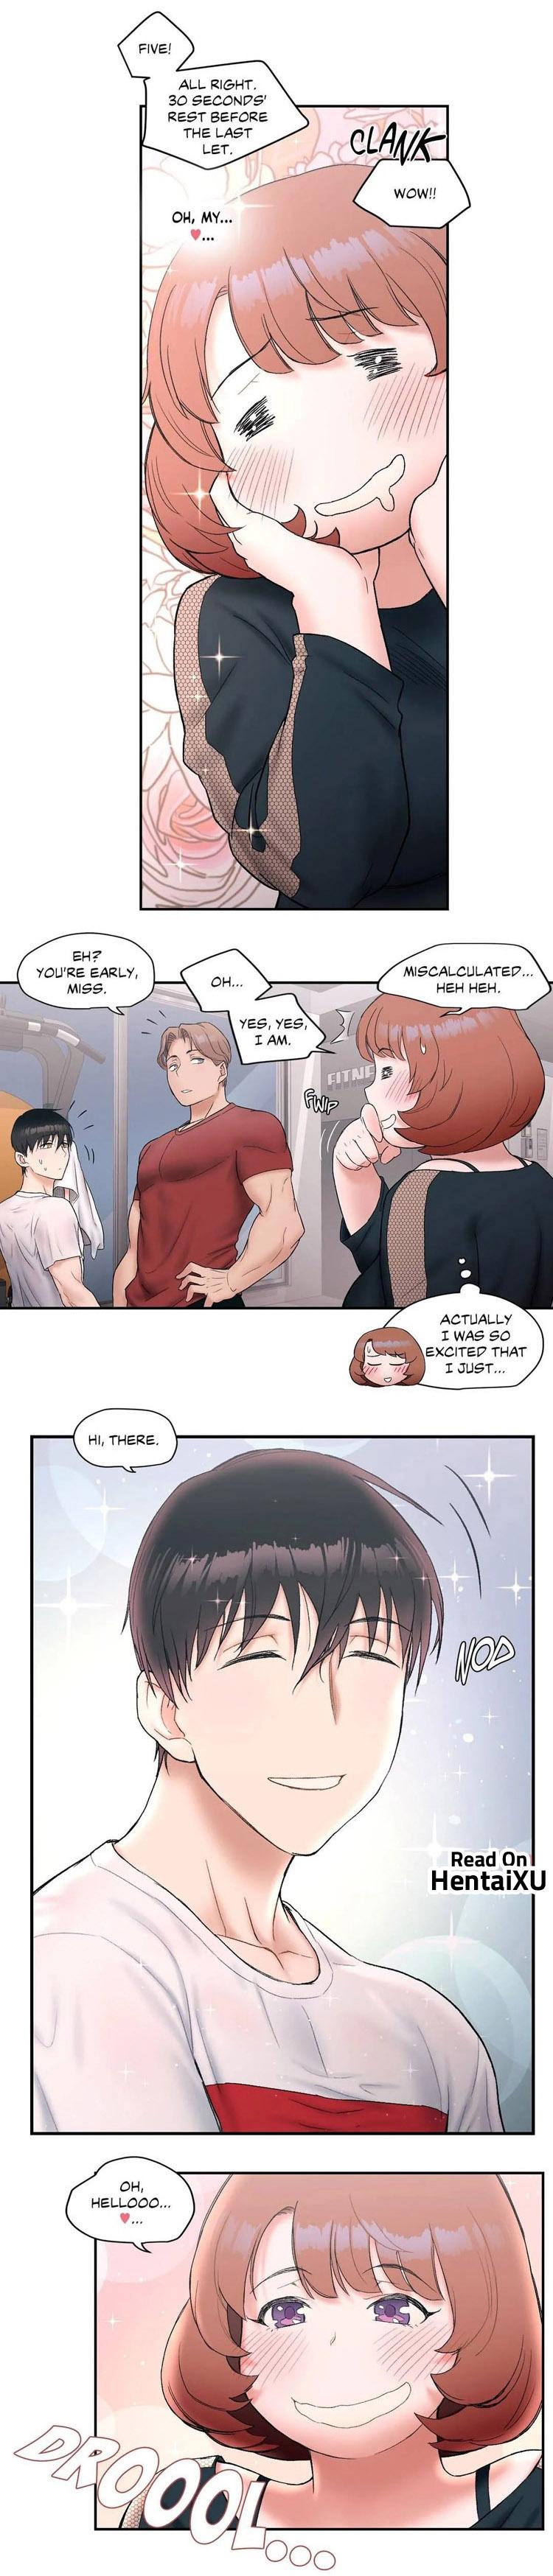 Sexercise Ch.13/? 137